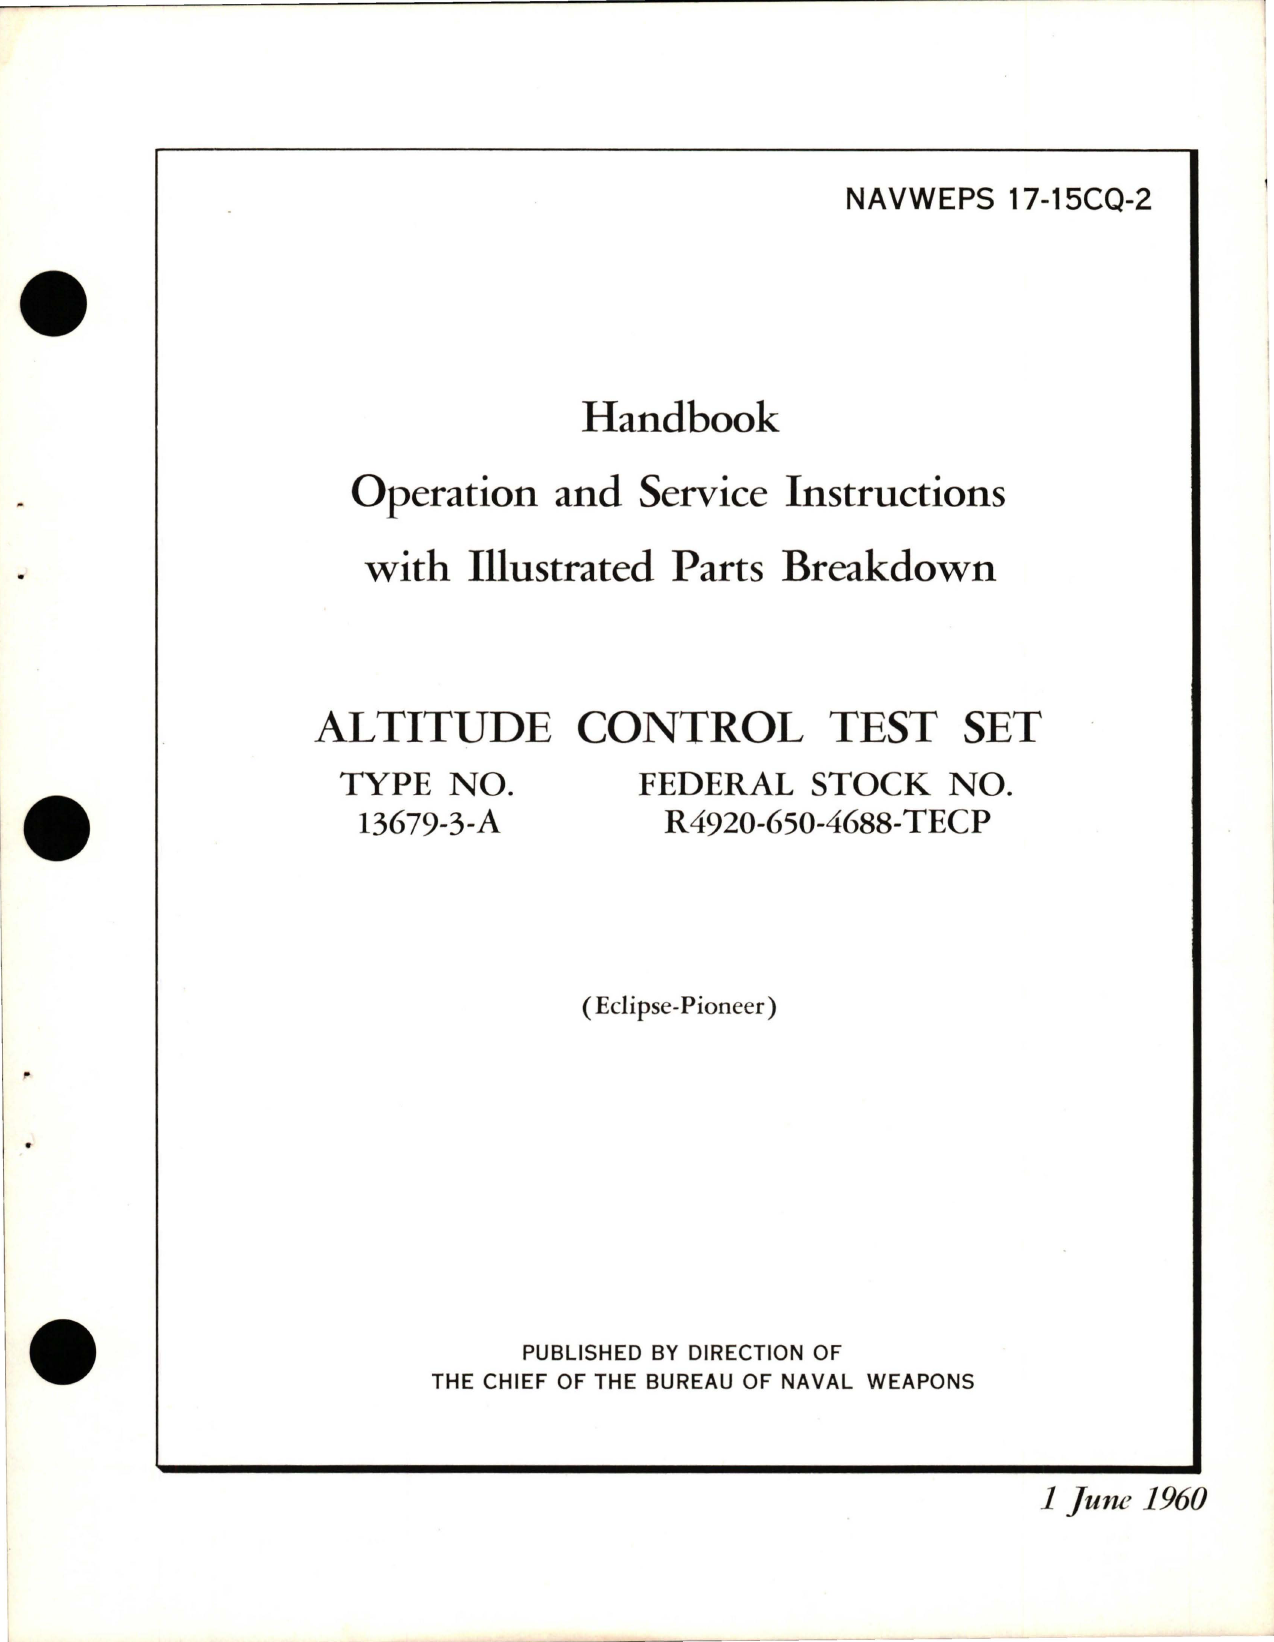 Sample page 1 from AirCorps Library document: Operation and Service Instructions with Illustrated Parts Breakdown for Altitude Control Test Set - Type 13679-3-A 